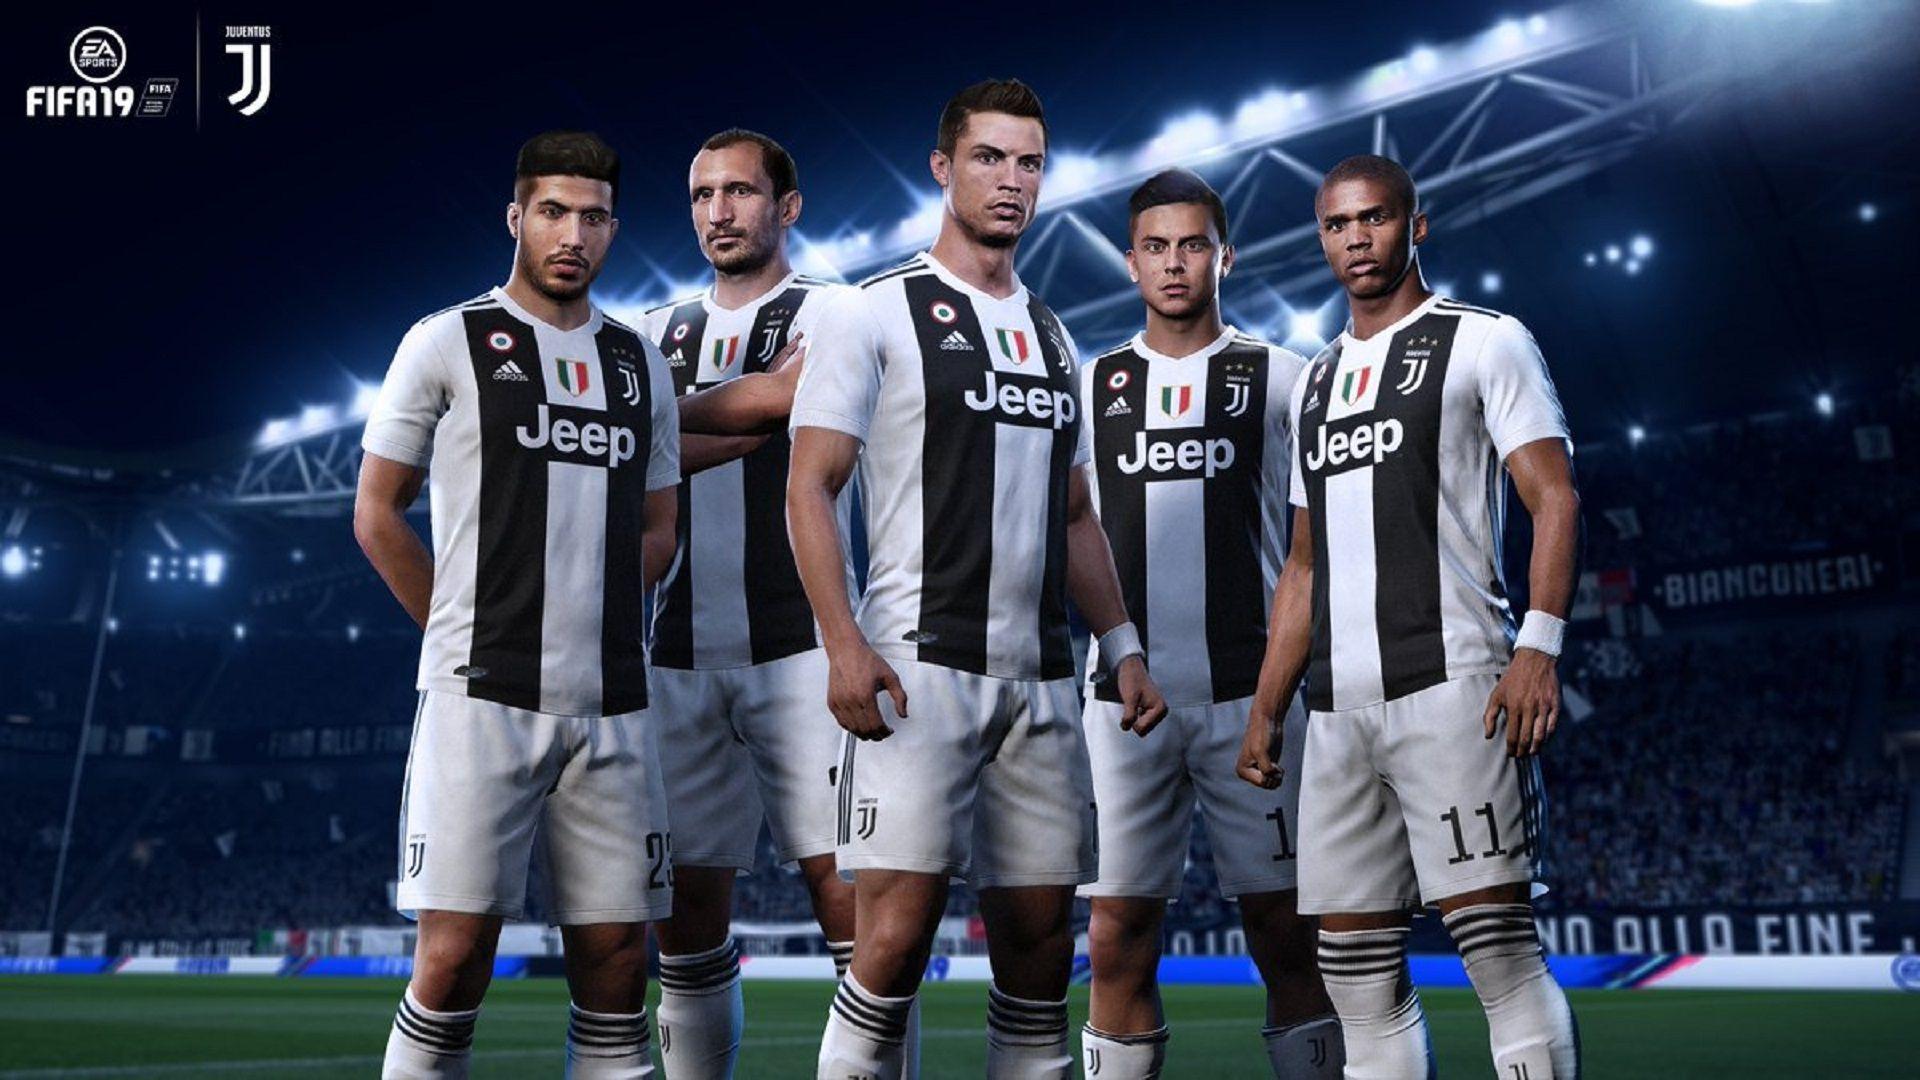 FIFA 19: New Champions League features in Ultimate Team, The Journey